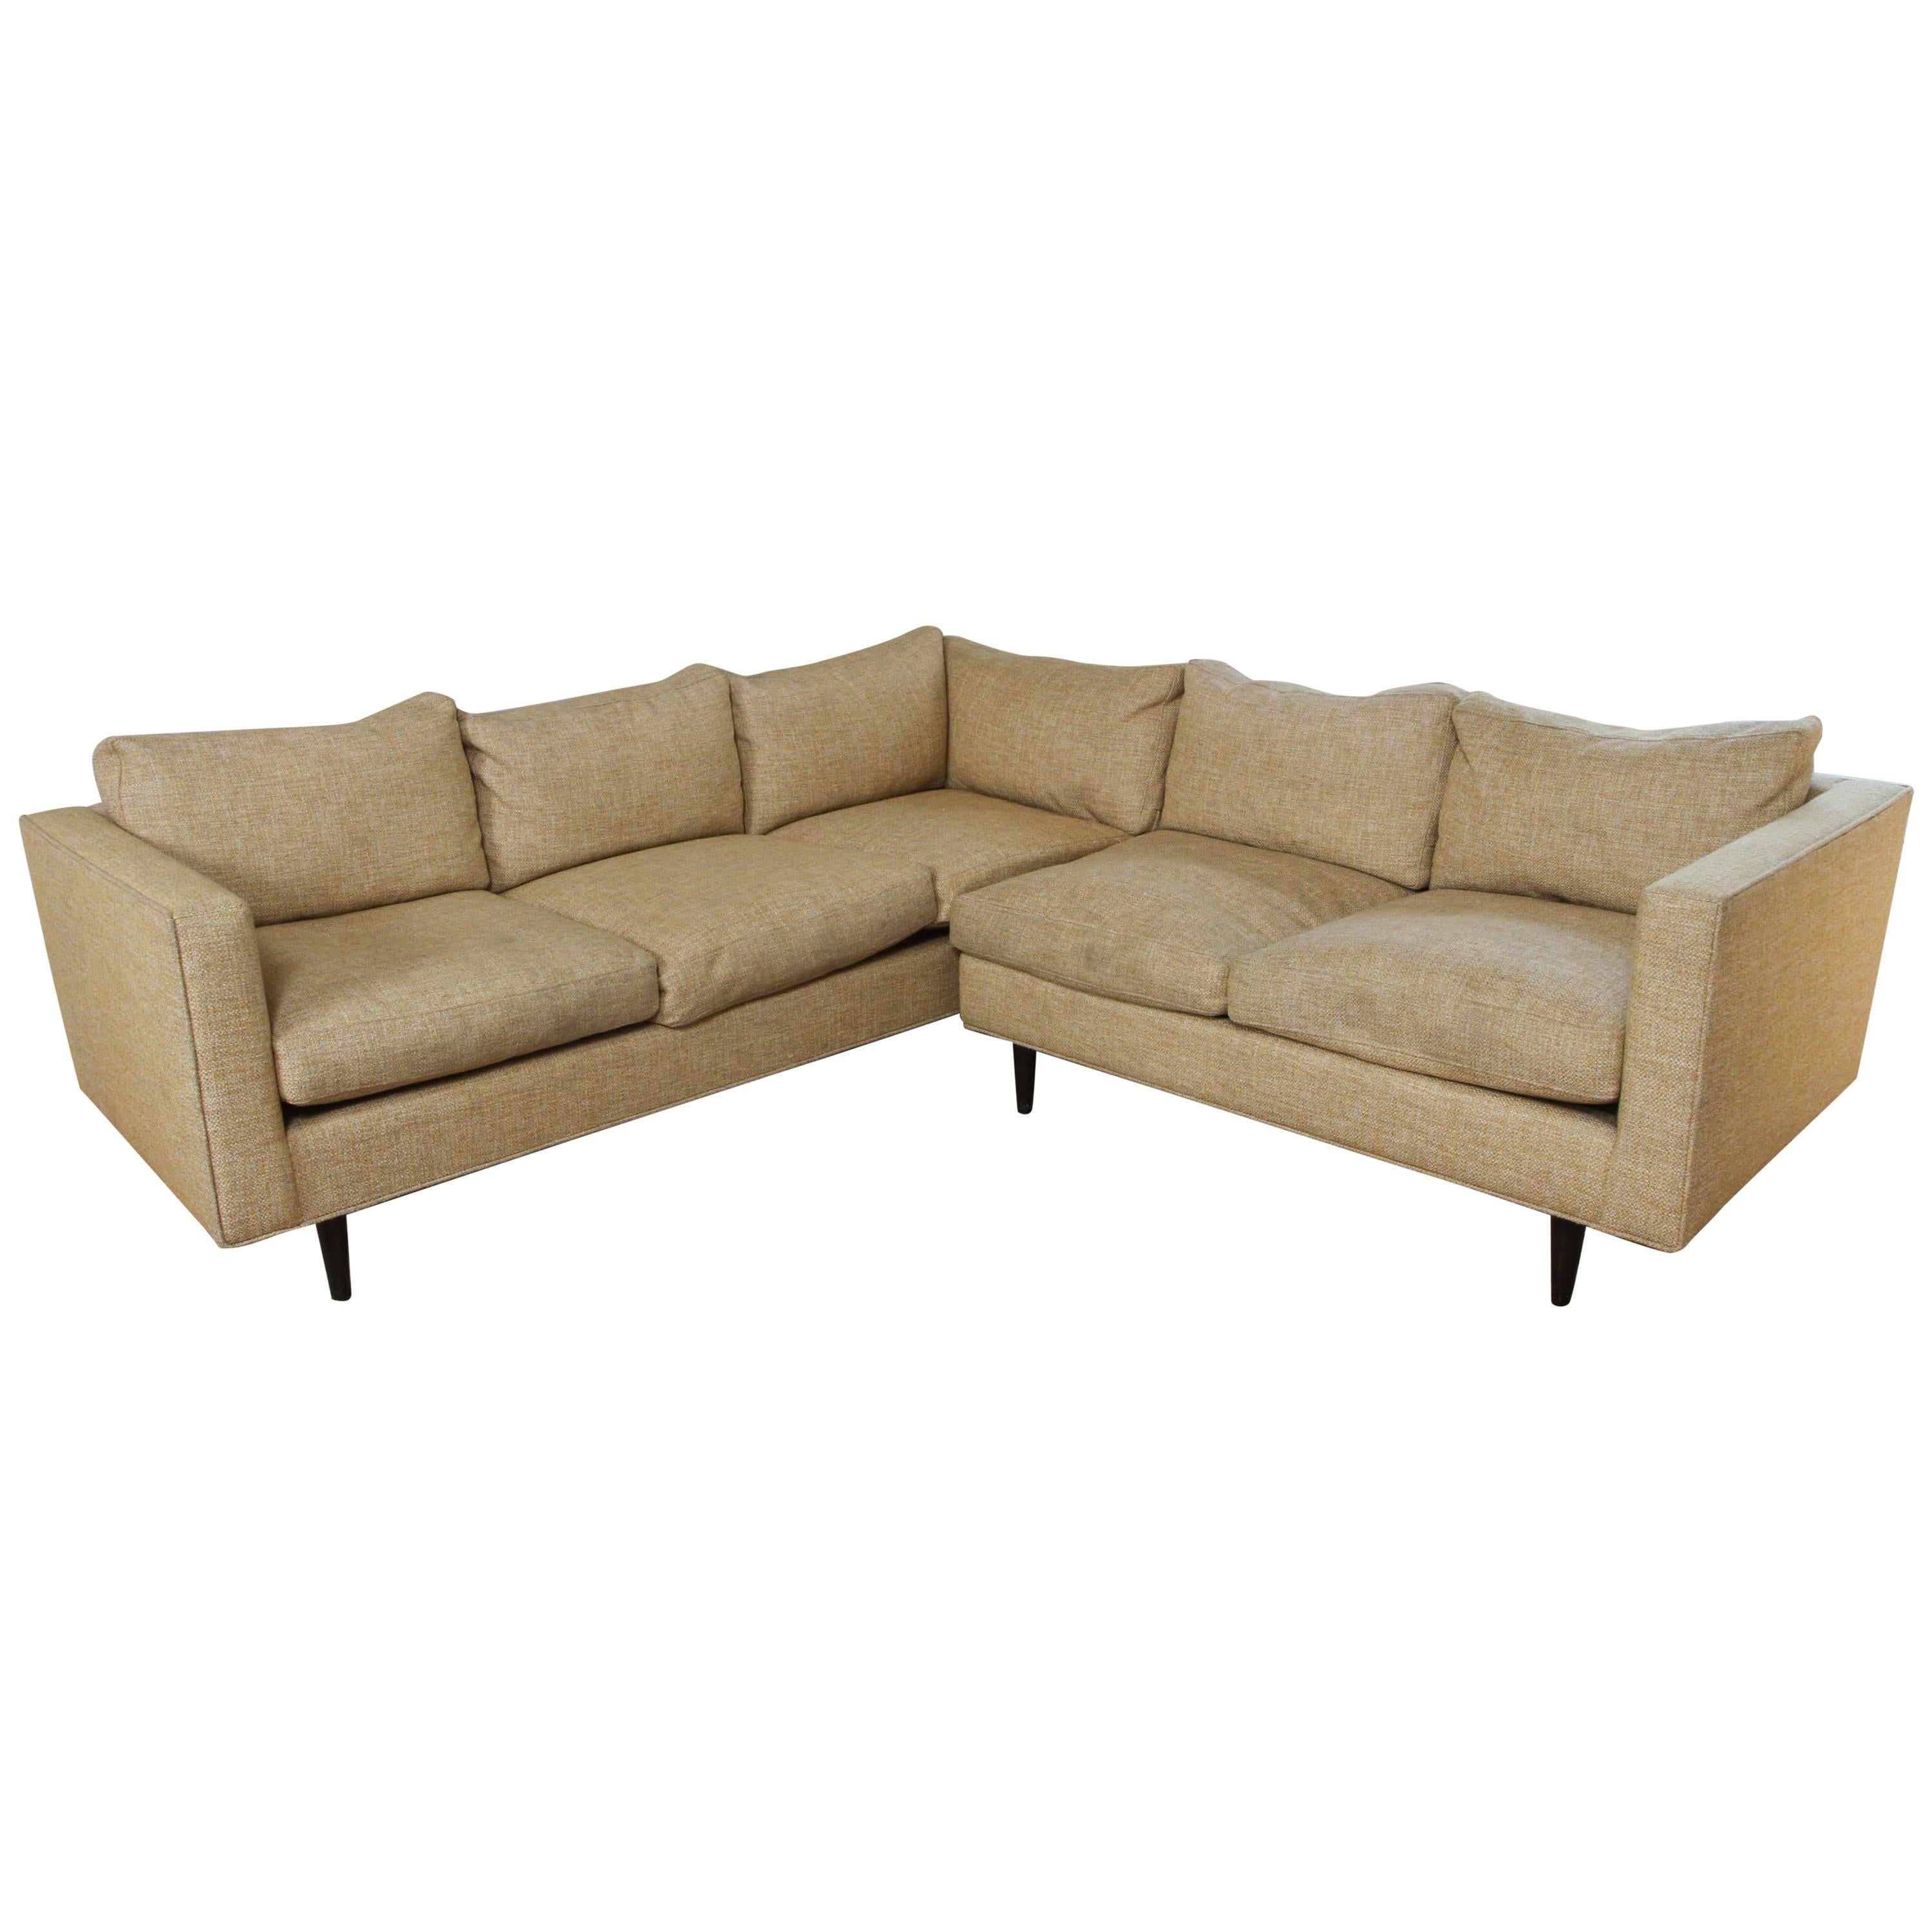 L-Sectional Sofa For Sale